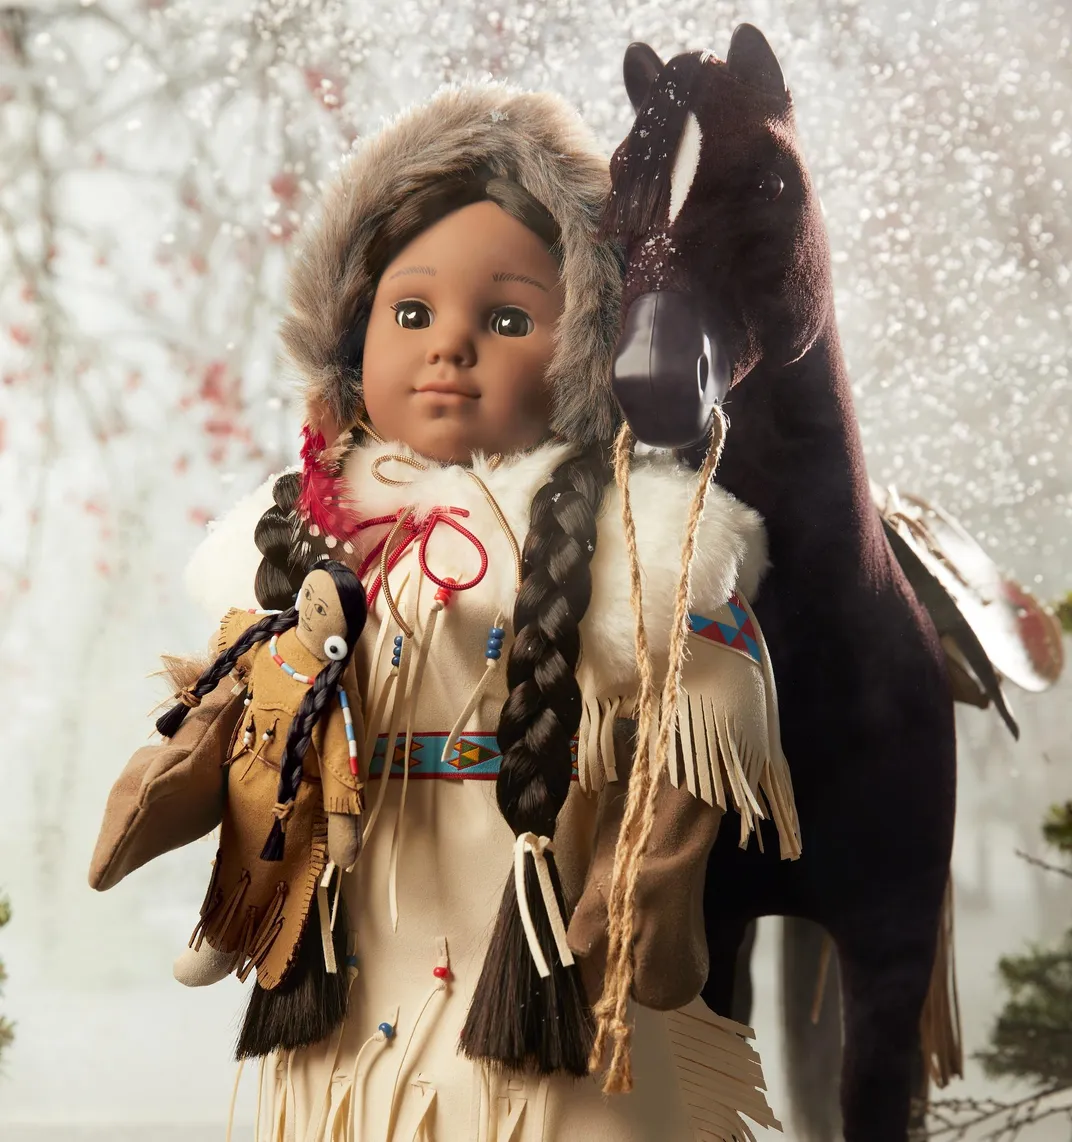 Kaya doll poses with her horse in front of a snowy backdrop